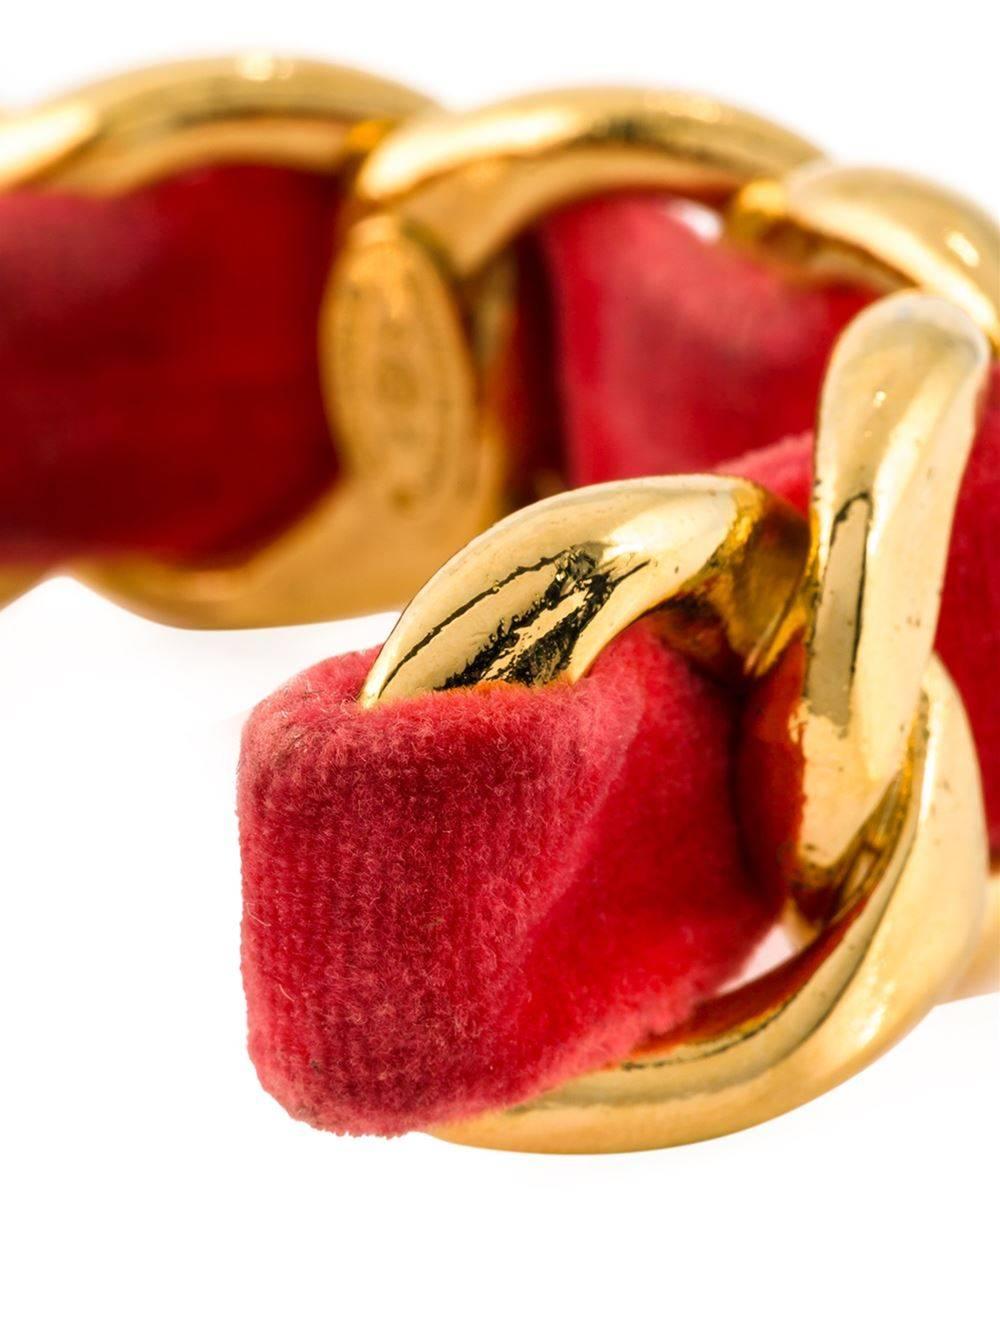 Gold-tone and red velvet curb chain cuff from Chanel Vintage.

Colour: Gold, red/ pink

Material: Metal, velvet

Measurements: width: 2.2 centimetres, circumference: 17.1 centimetres

Condition: Very good
The metal is in very good